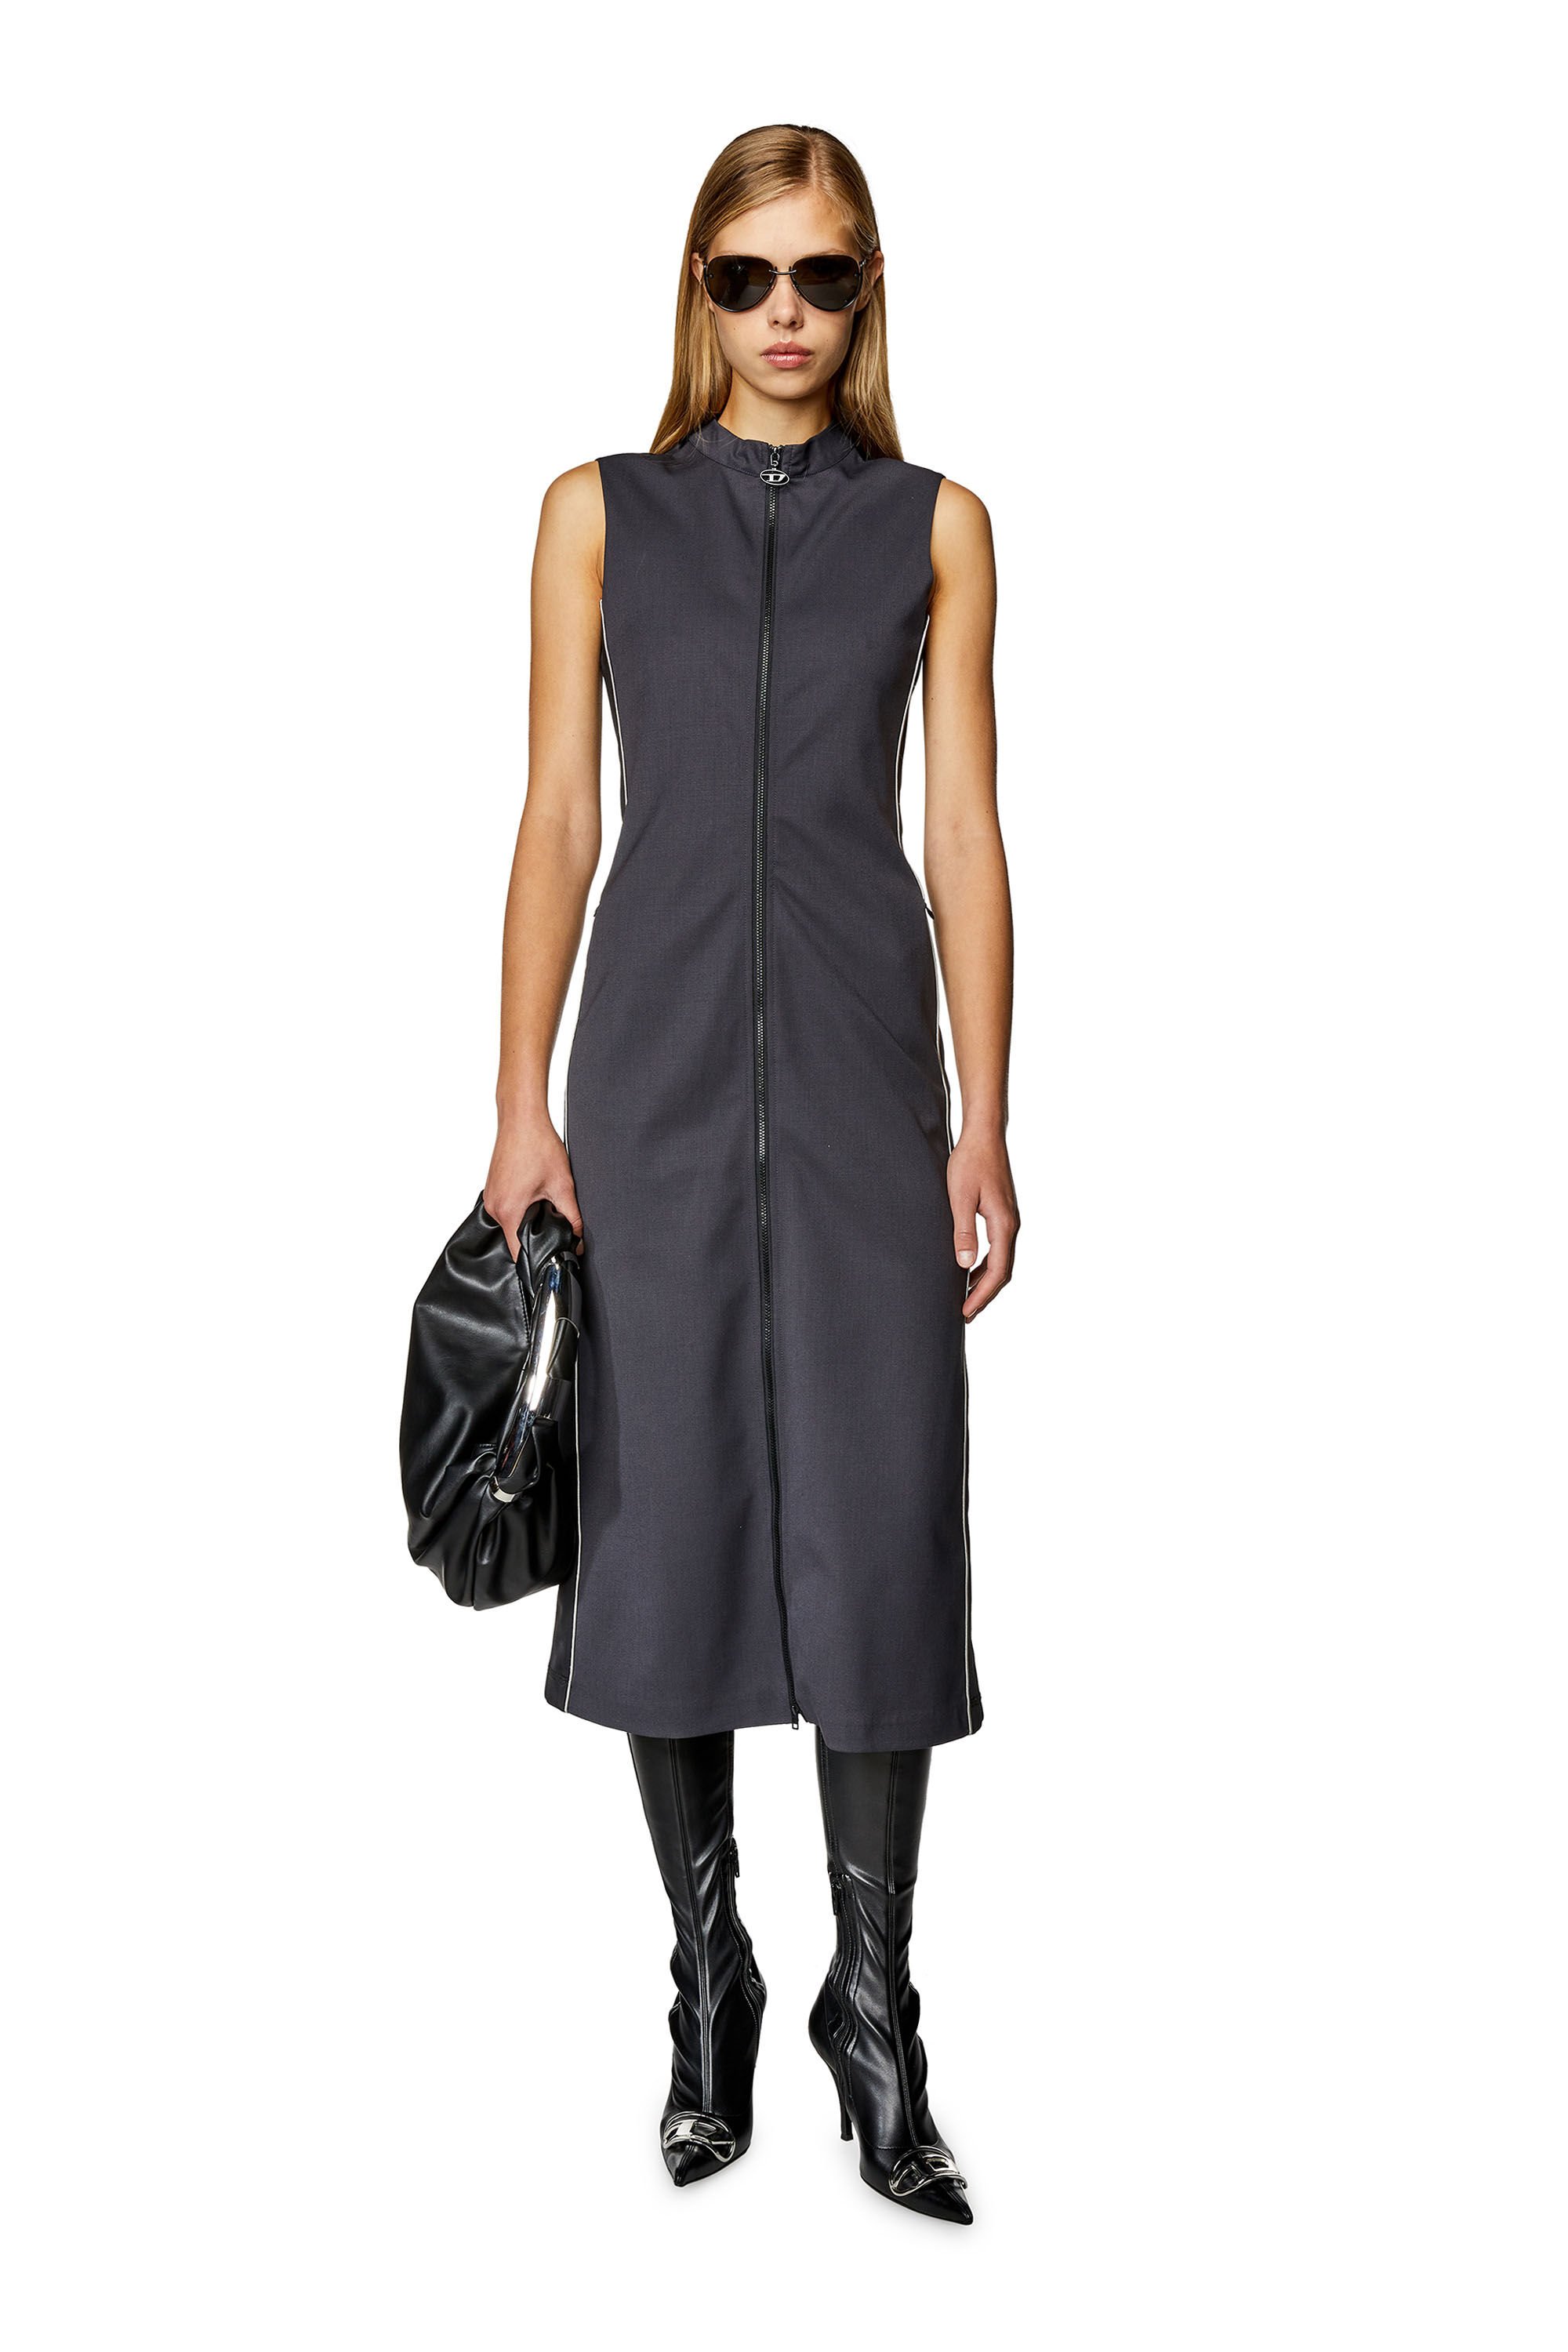 Diesel - D-AMY, Woman Midi dress in cool wool and tech fabric in Multicolor - Image 1